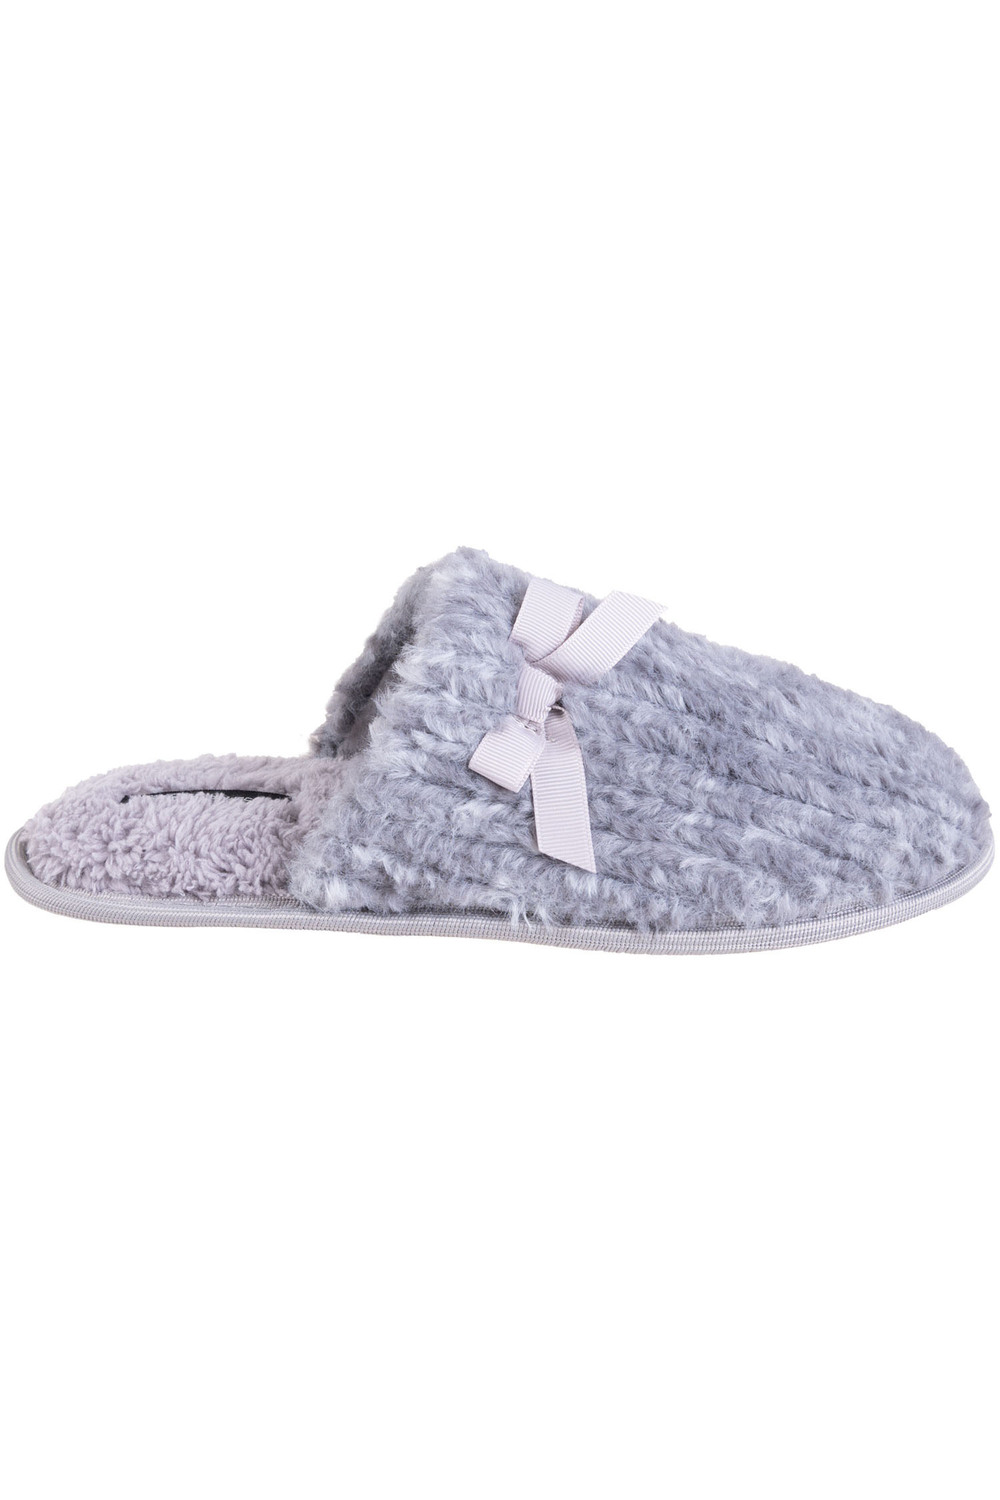 Faux fur slippers with bow detail, grey, large (L)